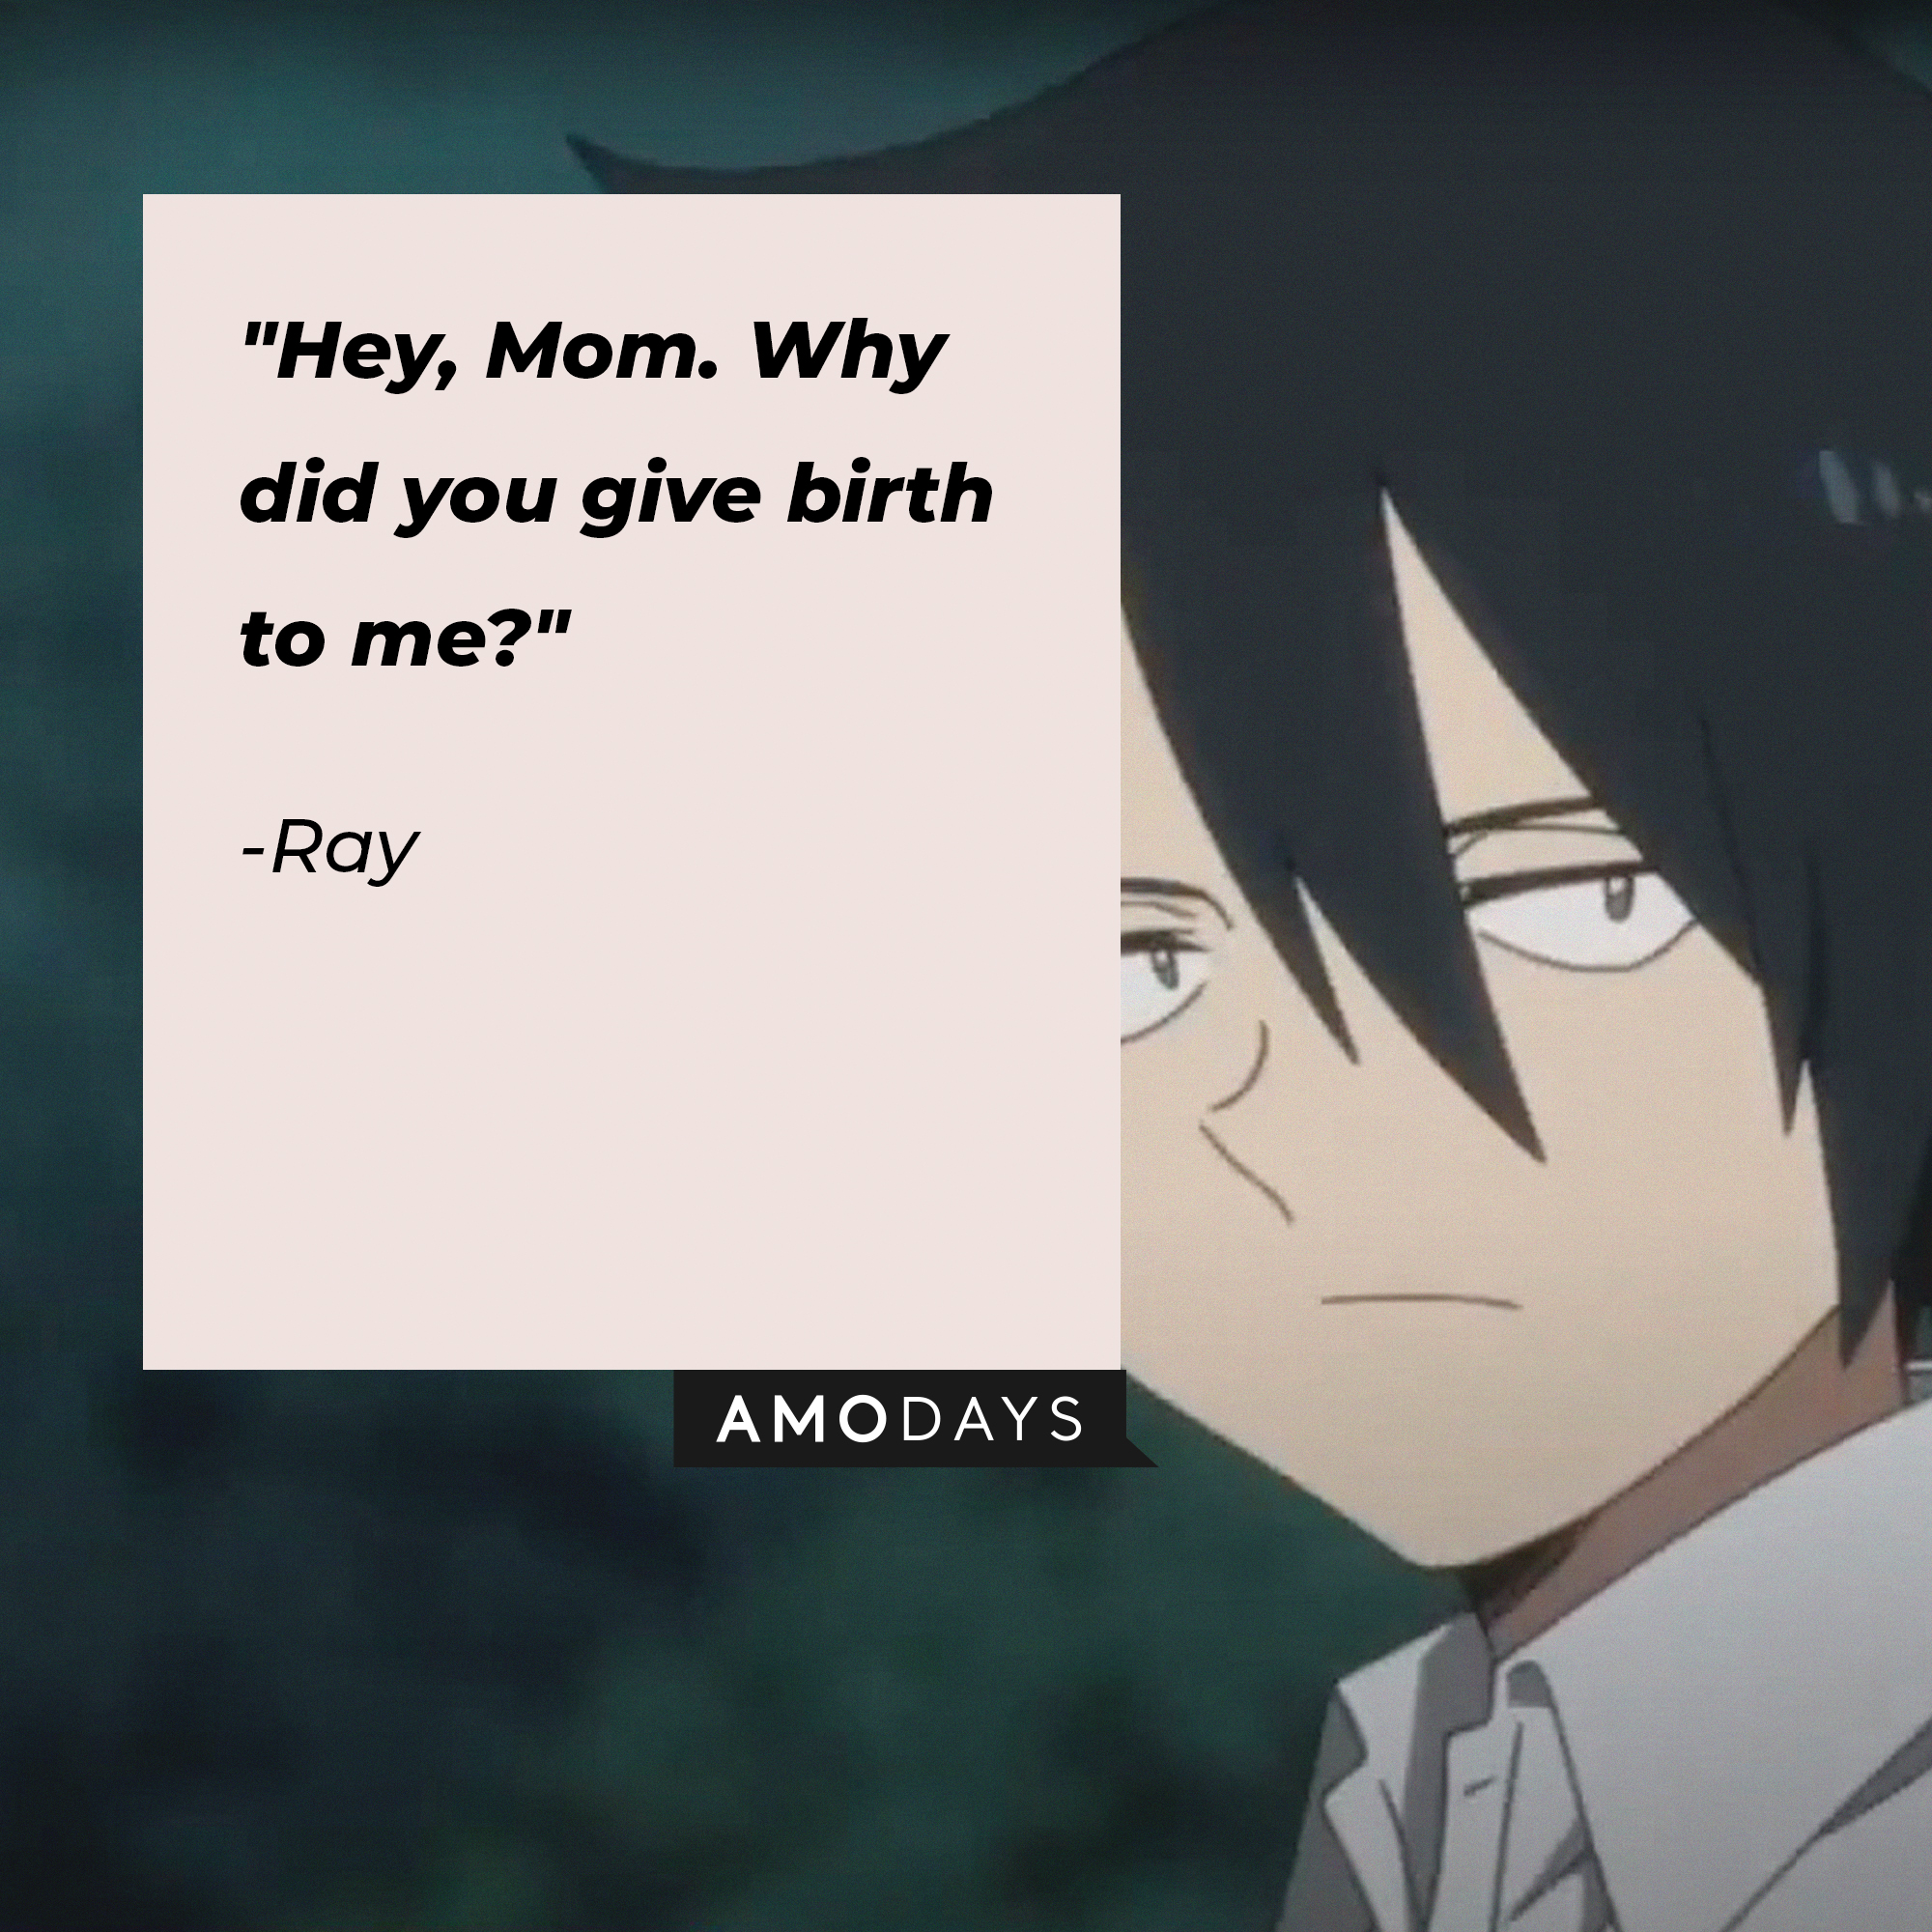 Ray's quote: "Hey, Mom. Why did you give birth to me?" | Image: AmoDays